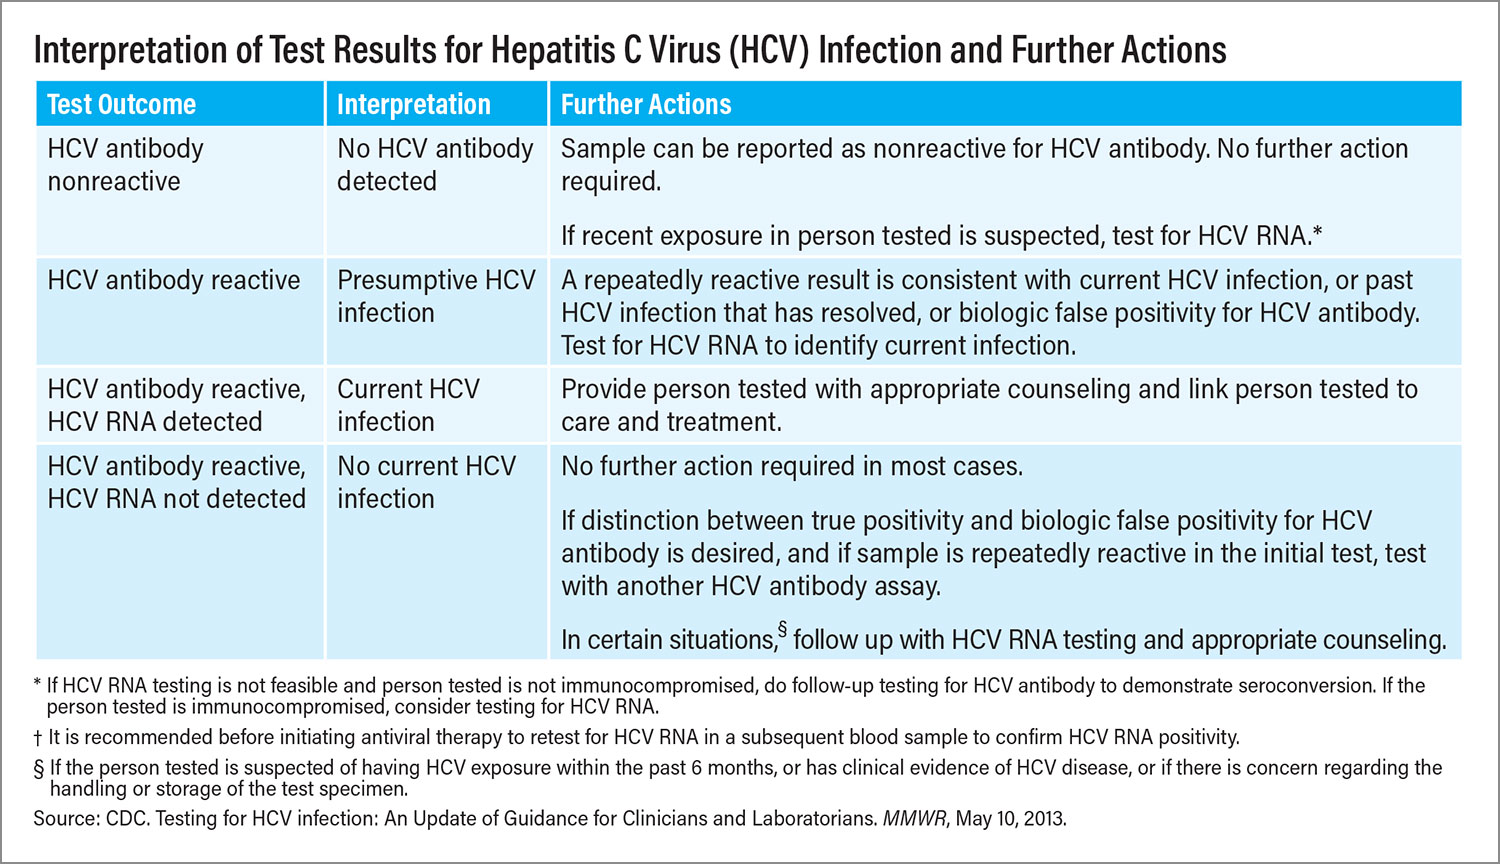 Interpretation of Test Results for Hepatitis C Virus (HCV) Infection and Further Actions. Source: CDC. Testing for HCV infection: An Update of Guidance for Clinicians and Laboratorians. MMWR, May 10, 2013.